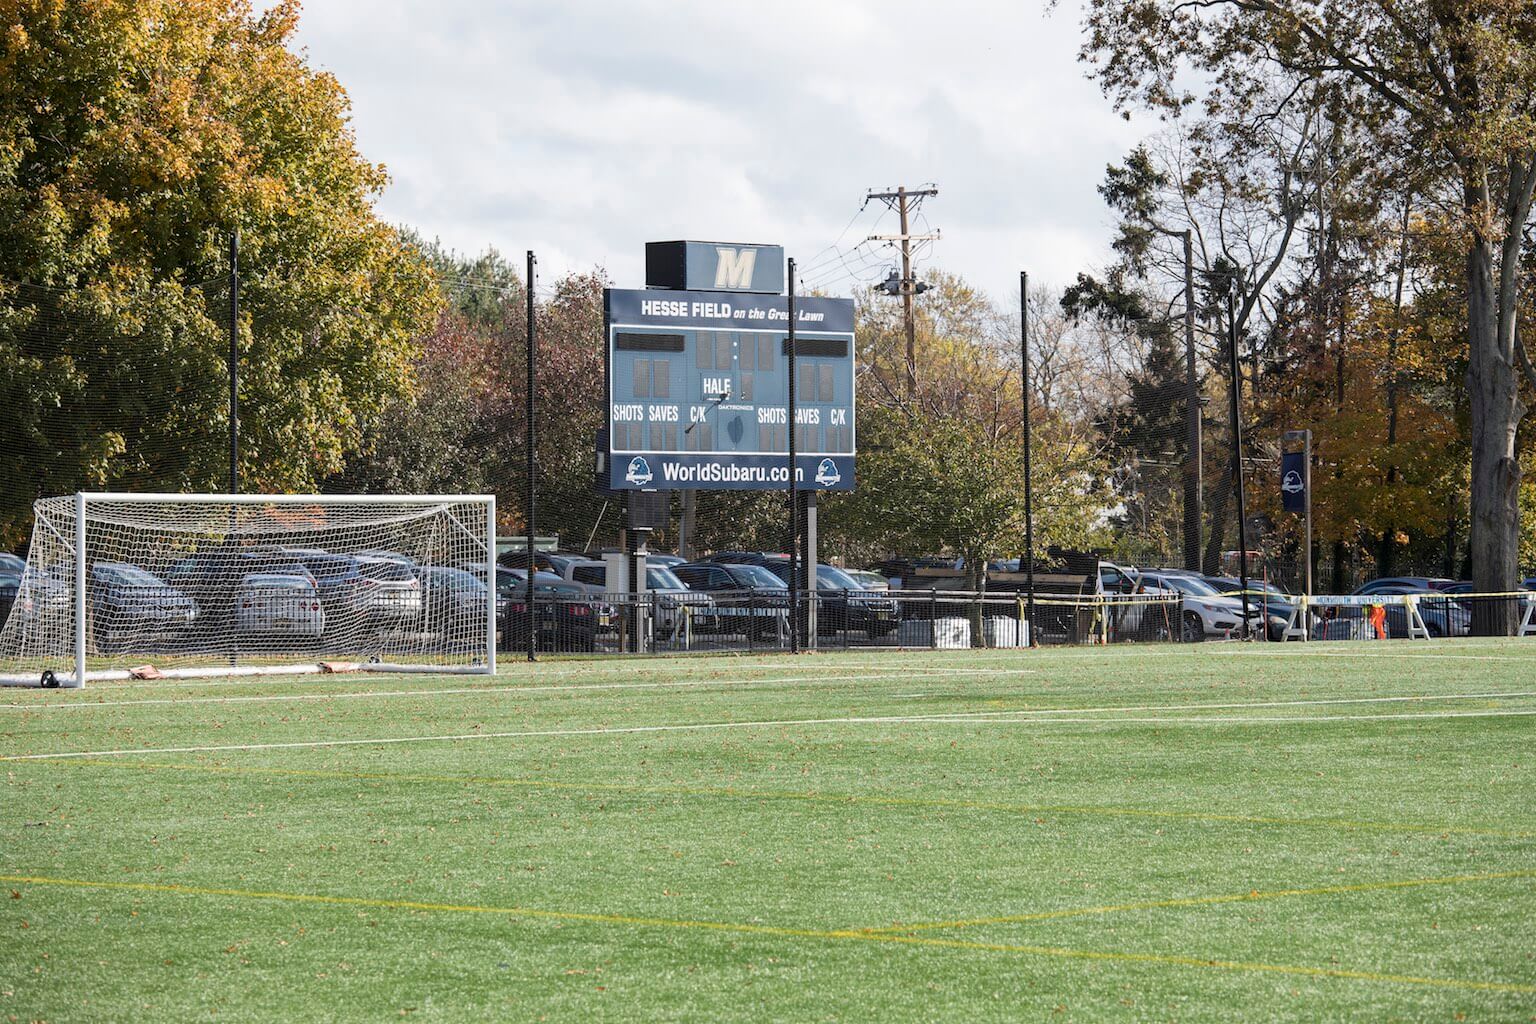 Photo of a goal and the scoreboard of Hesse Field